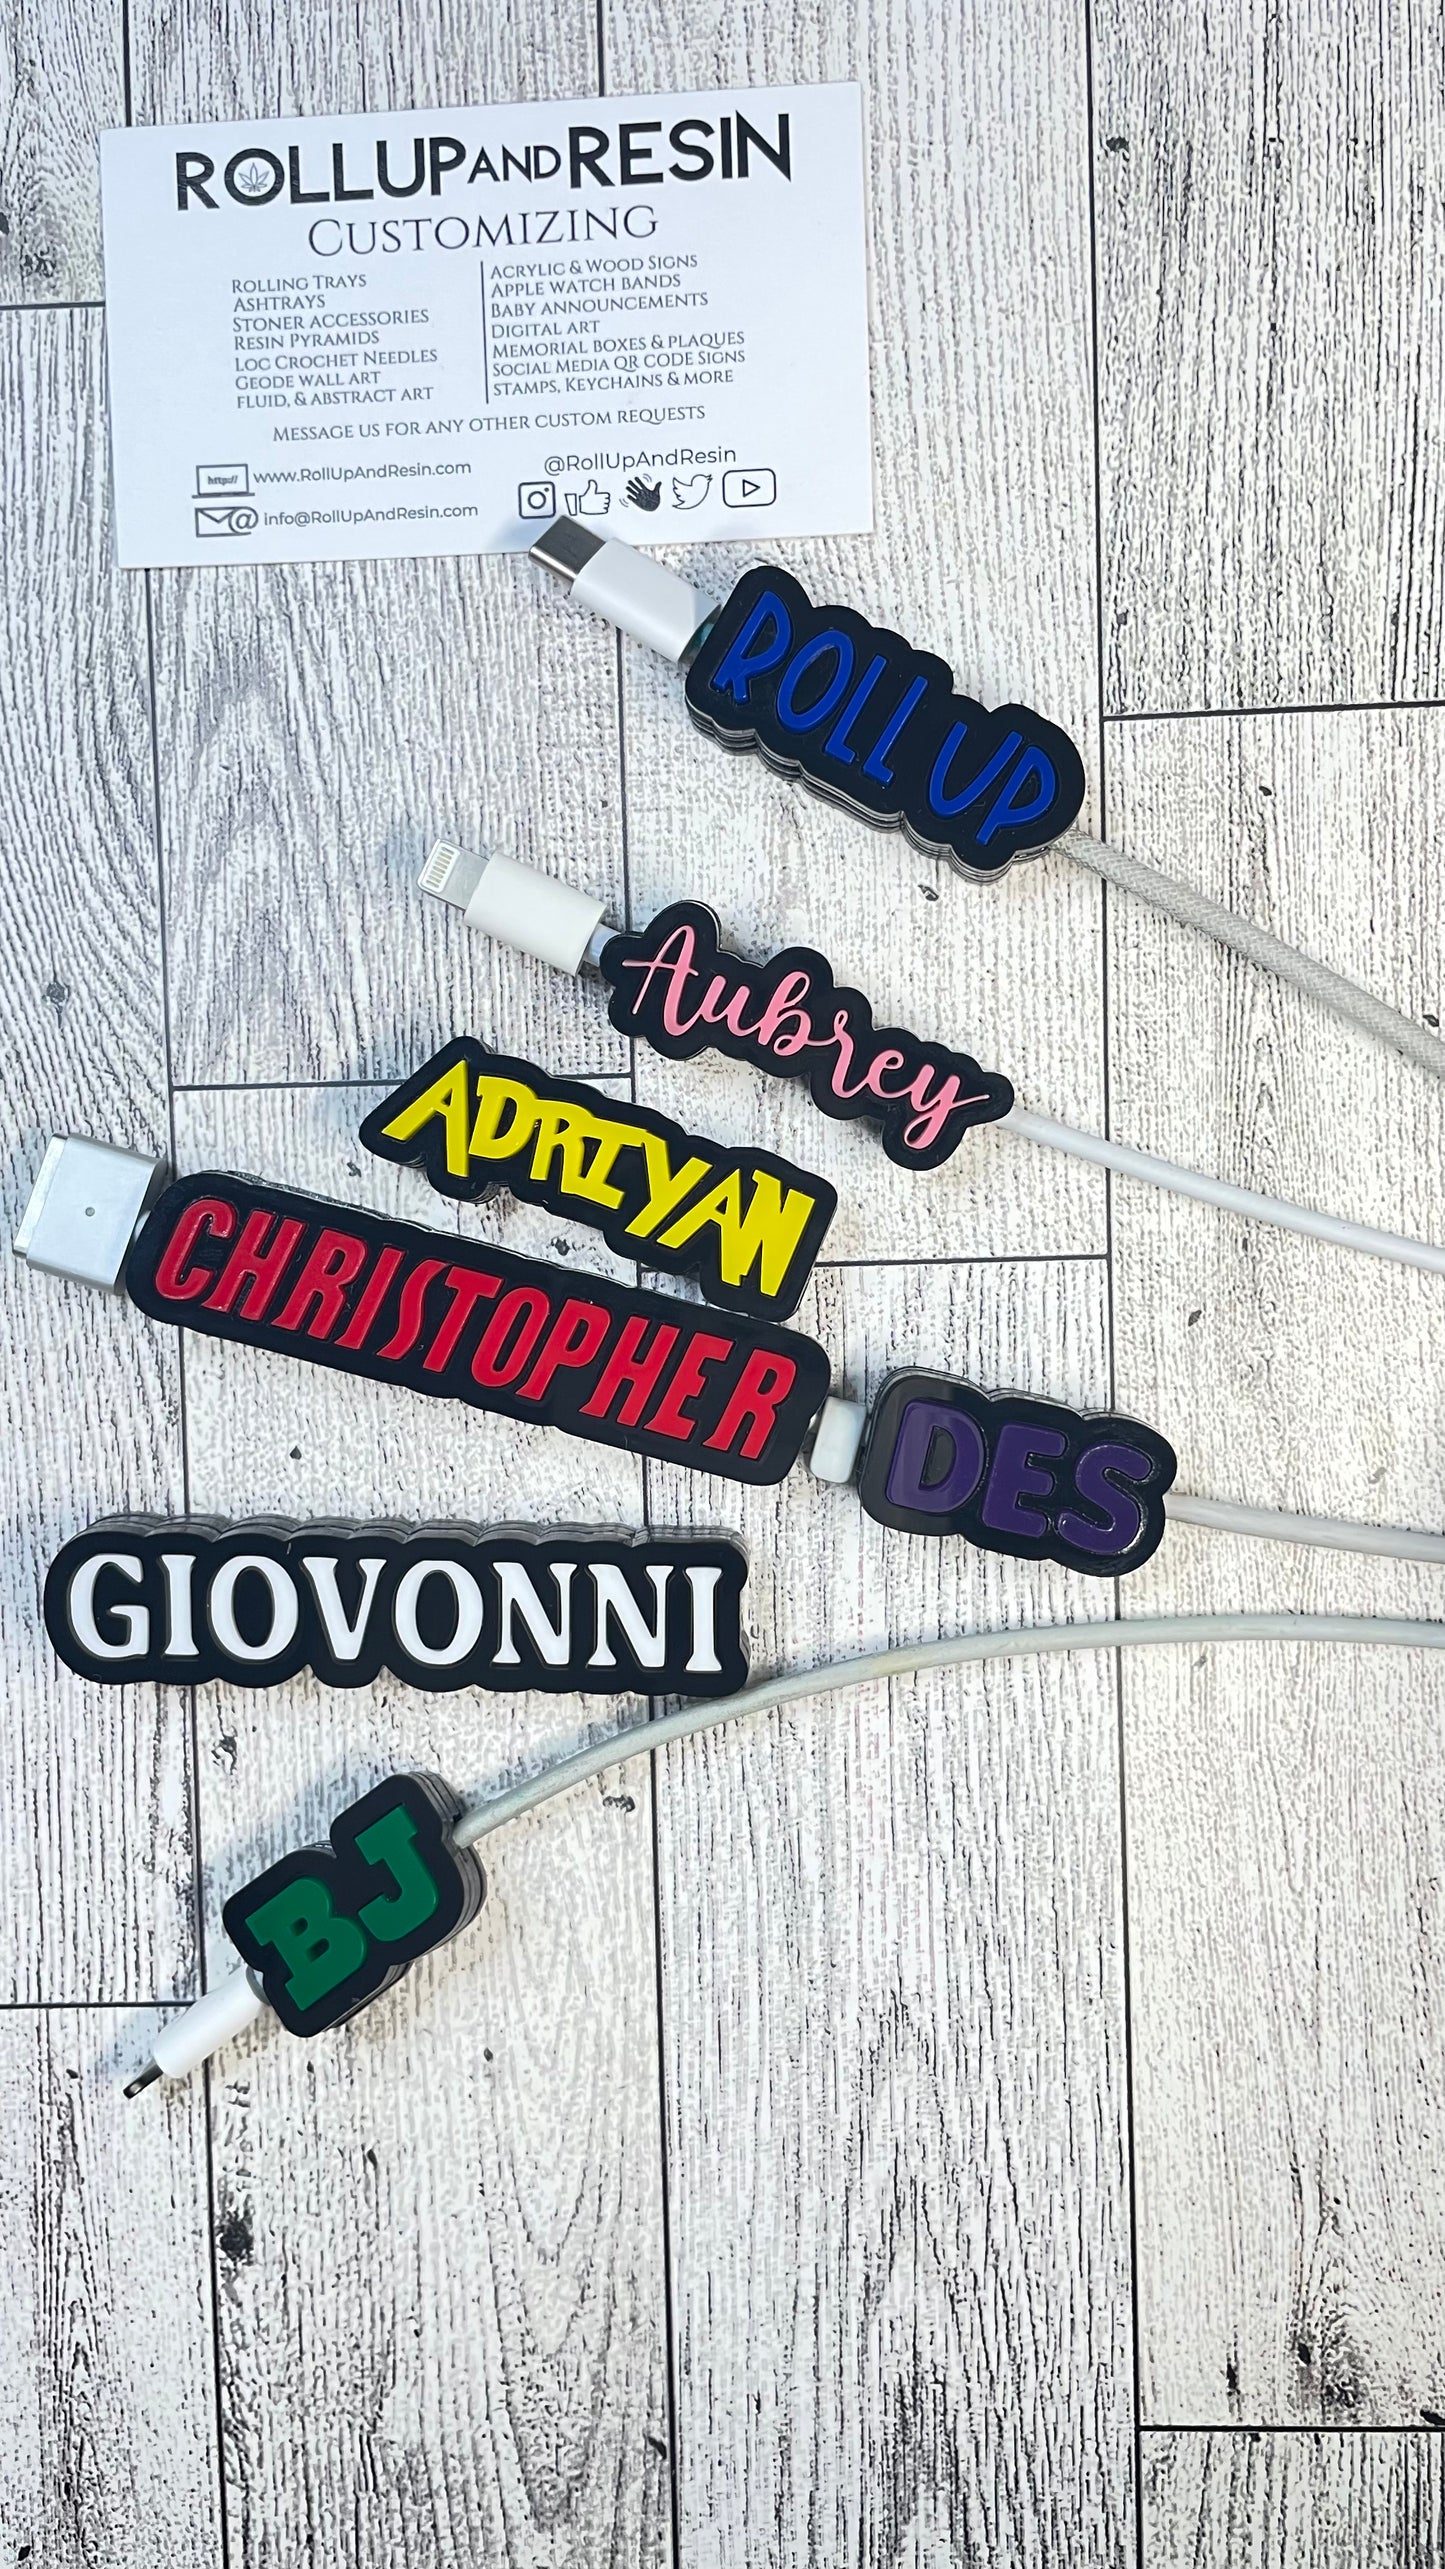 Phone Charger Name Tags